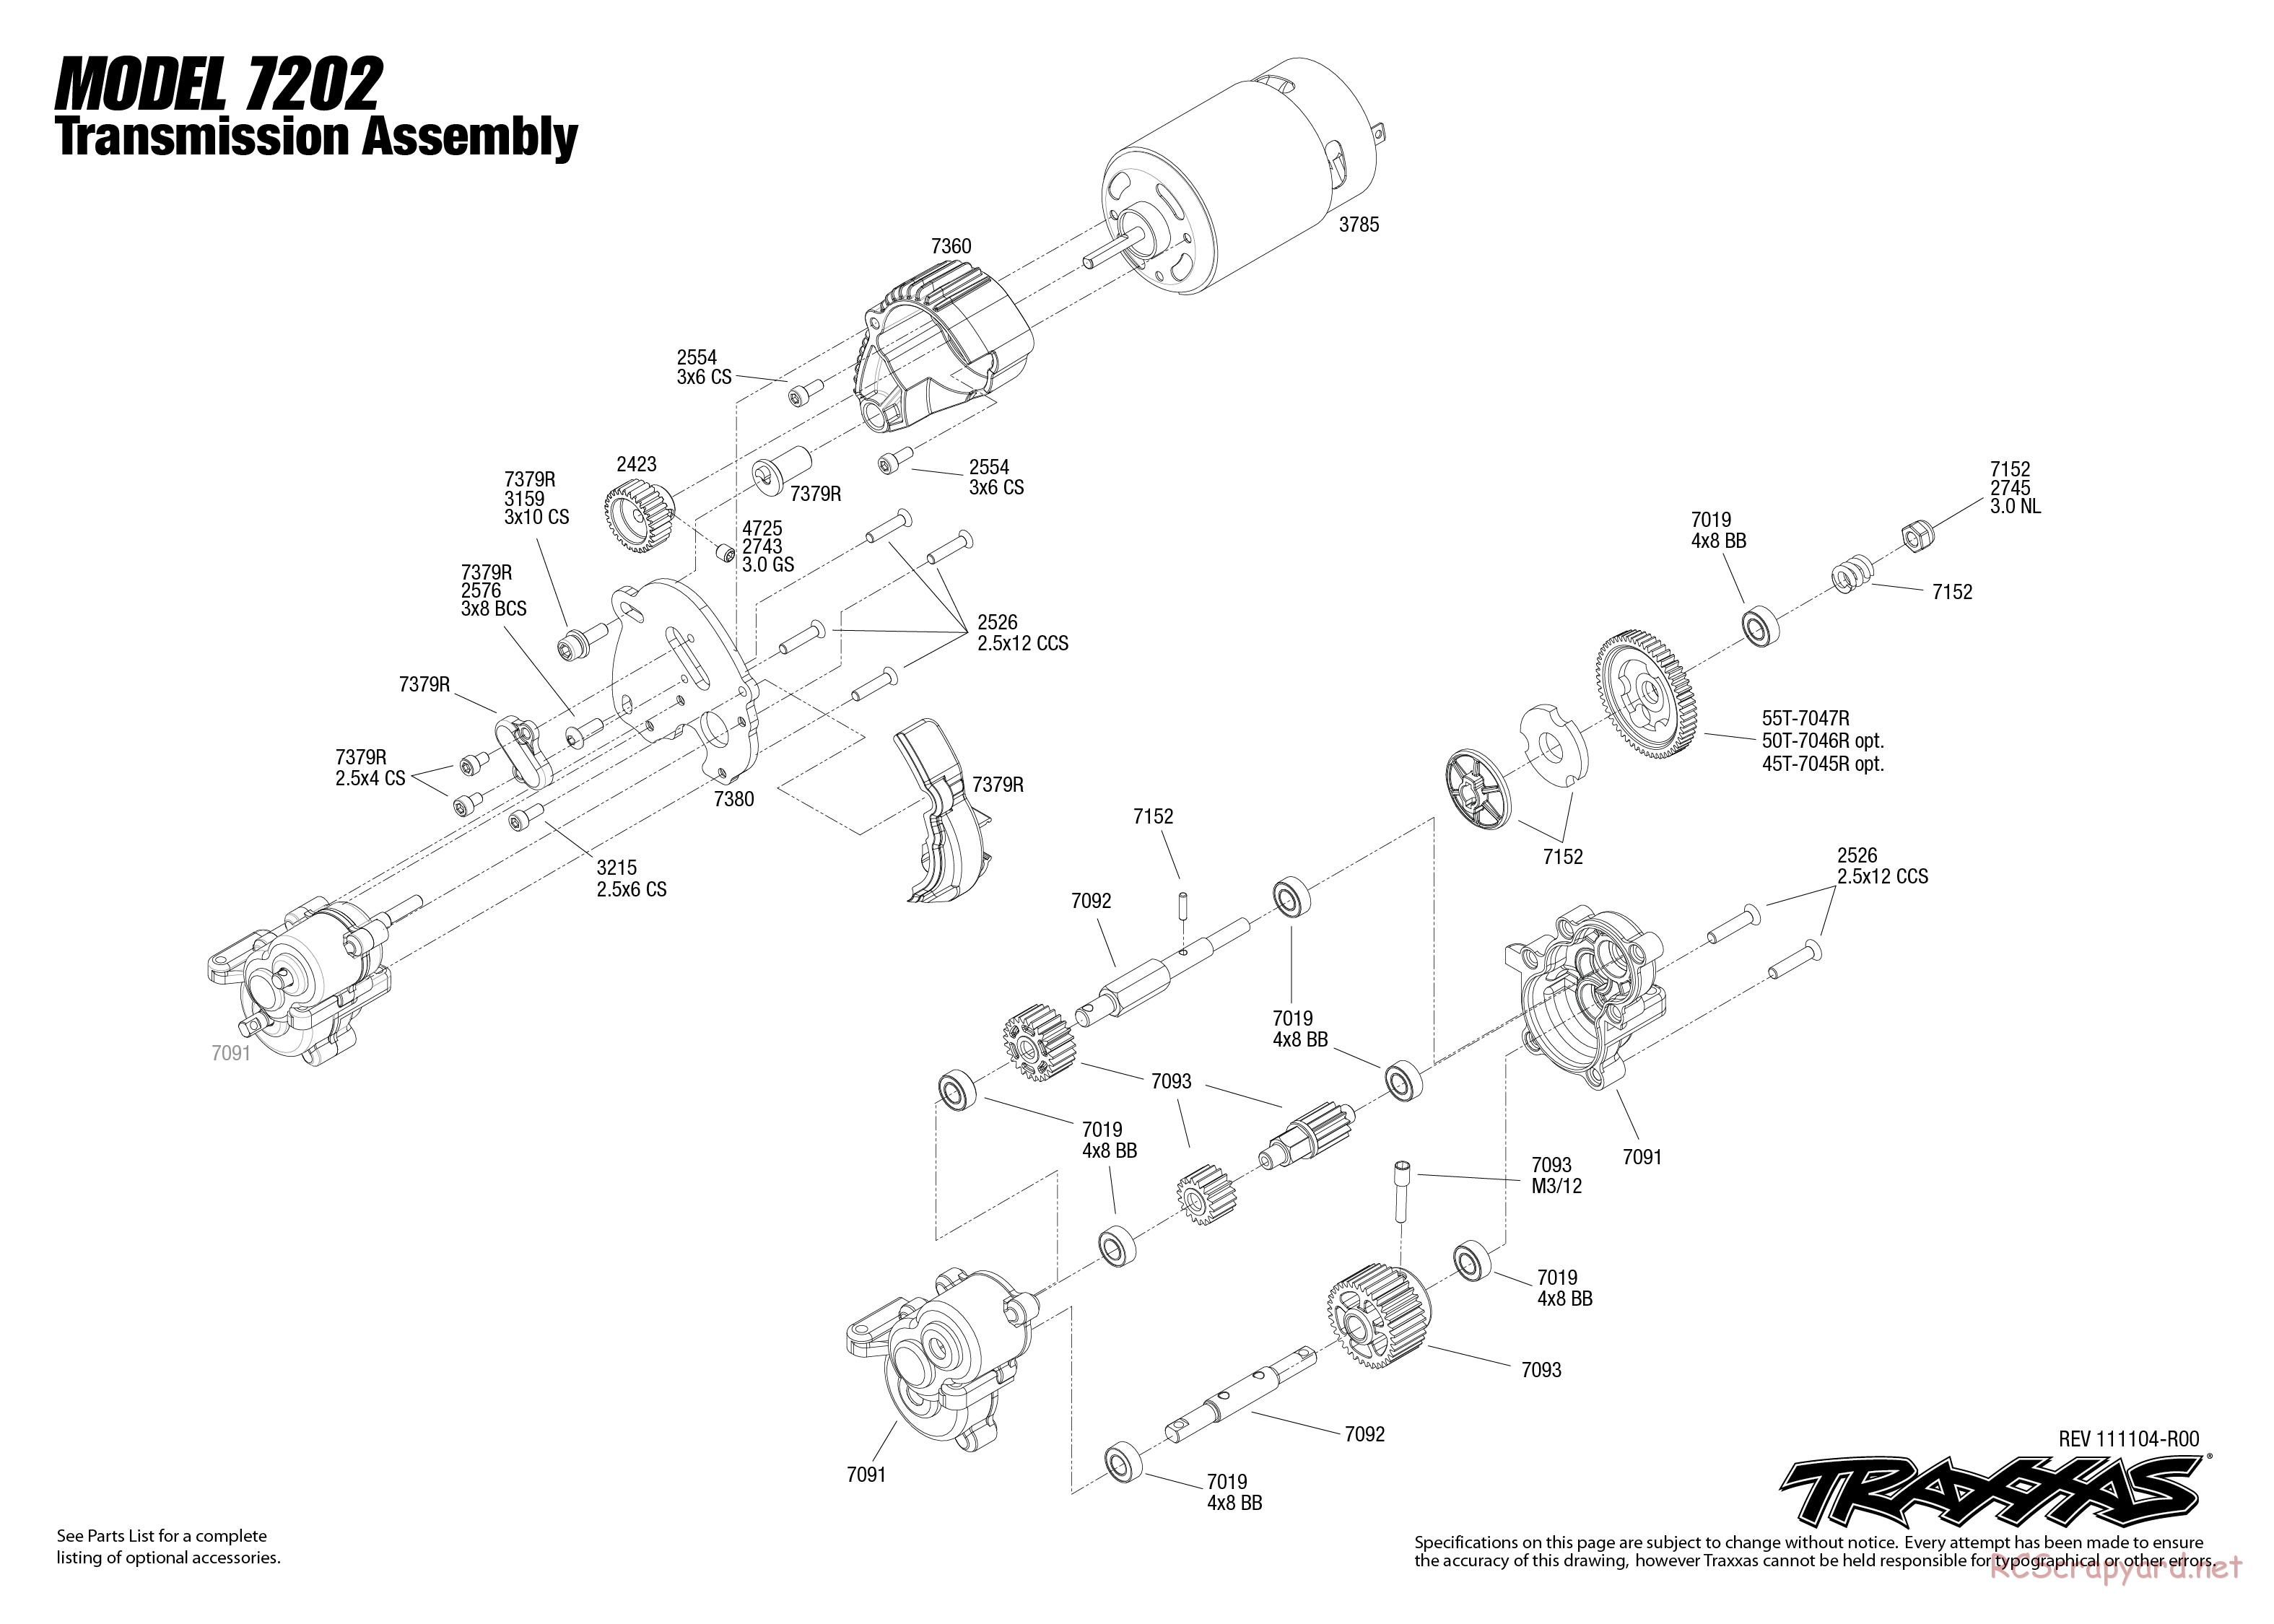 Traxxas - 1/16 Grave Digger (2012) - Exploded Views - Page 4